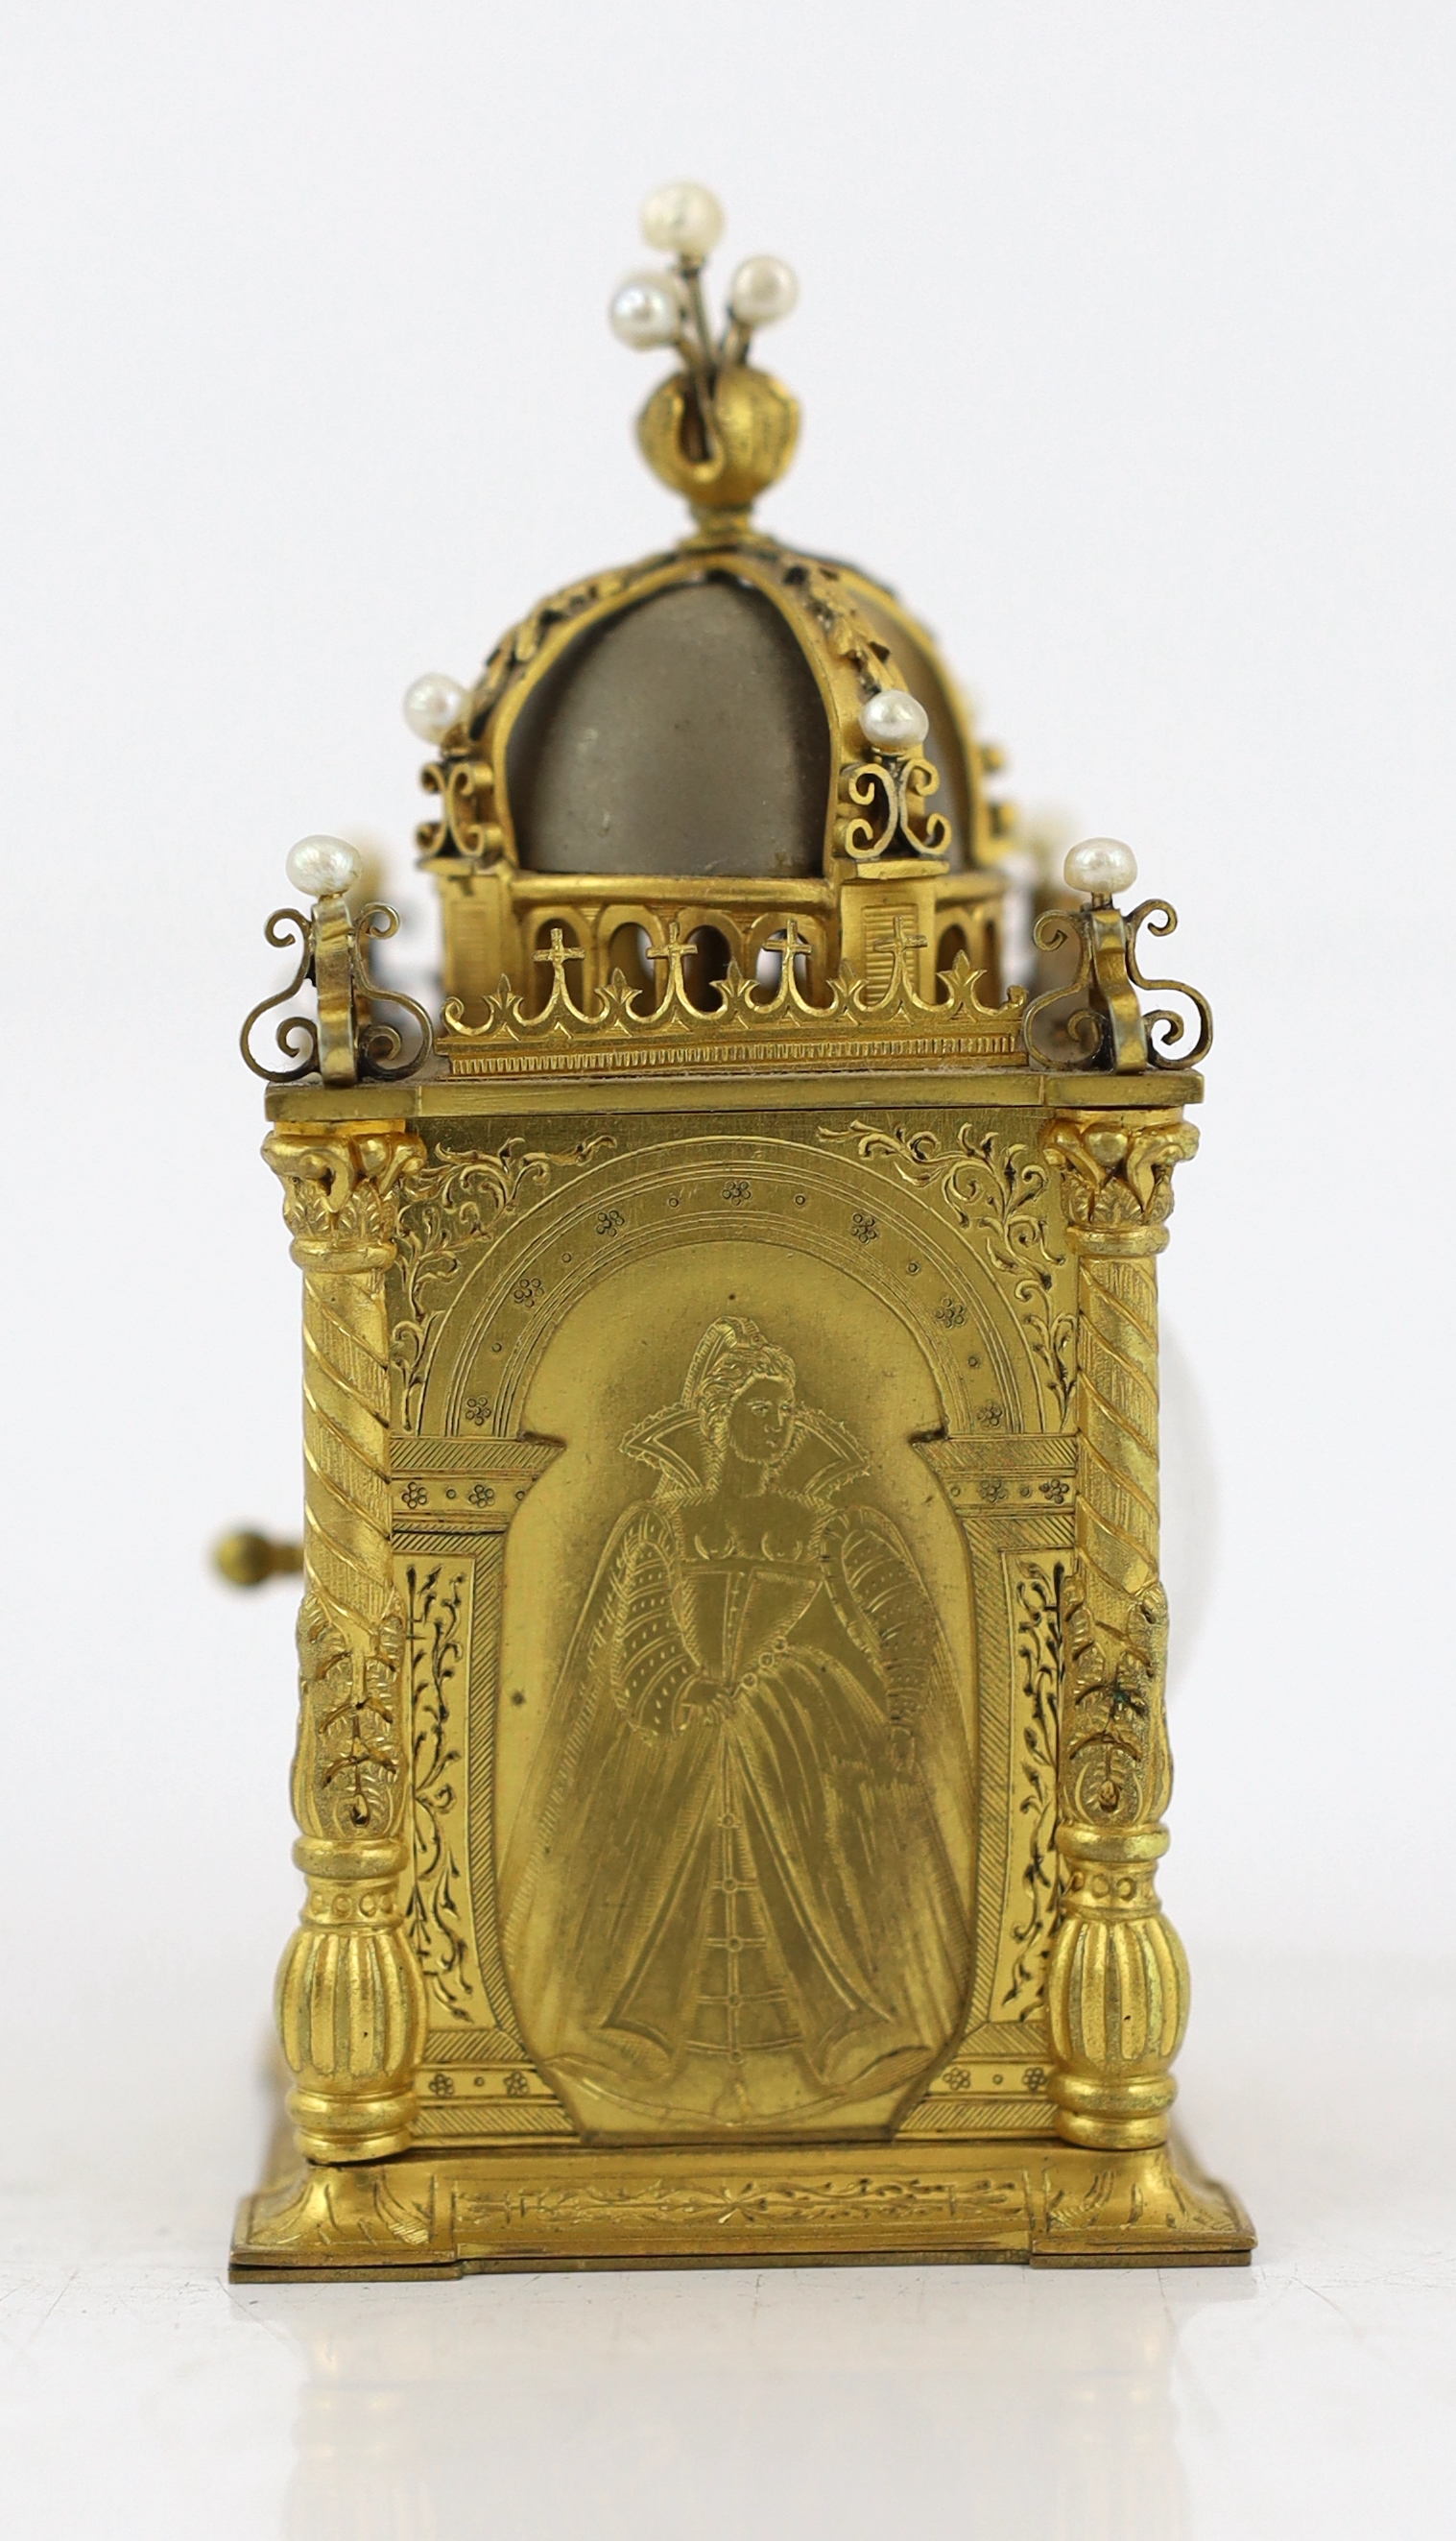 An early 20th century French miniature timepiece modelled on a 17th century domed bell clock, the - Image 3 of 6